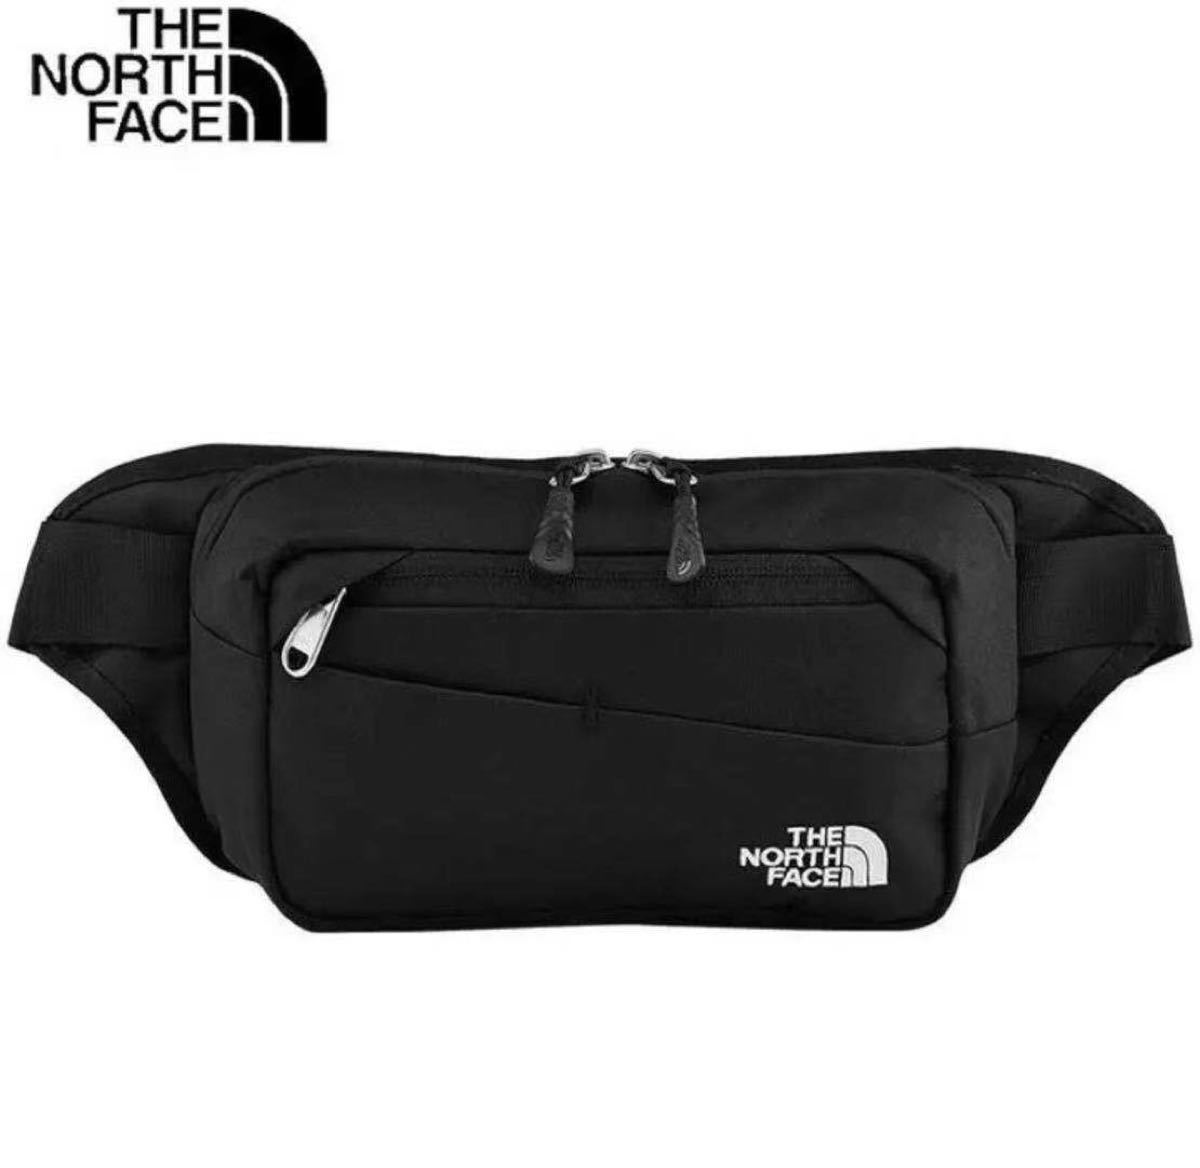 THE NORTH FACE ウエストバッグ ウエストポーチ ボディバッグ